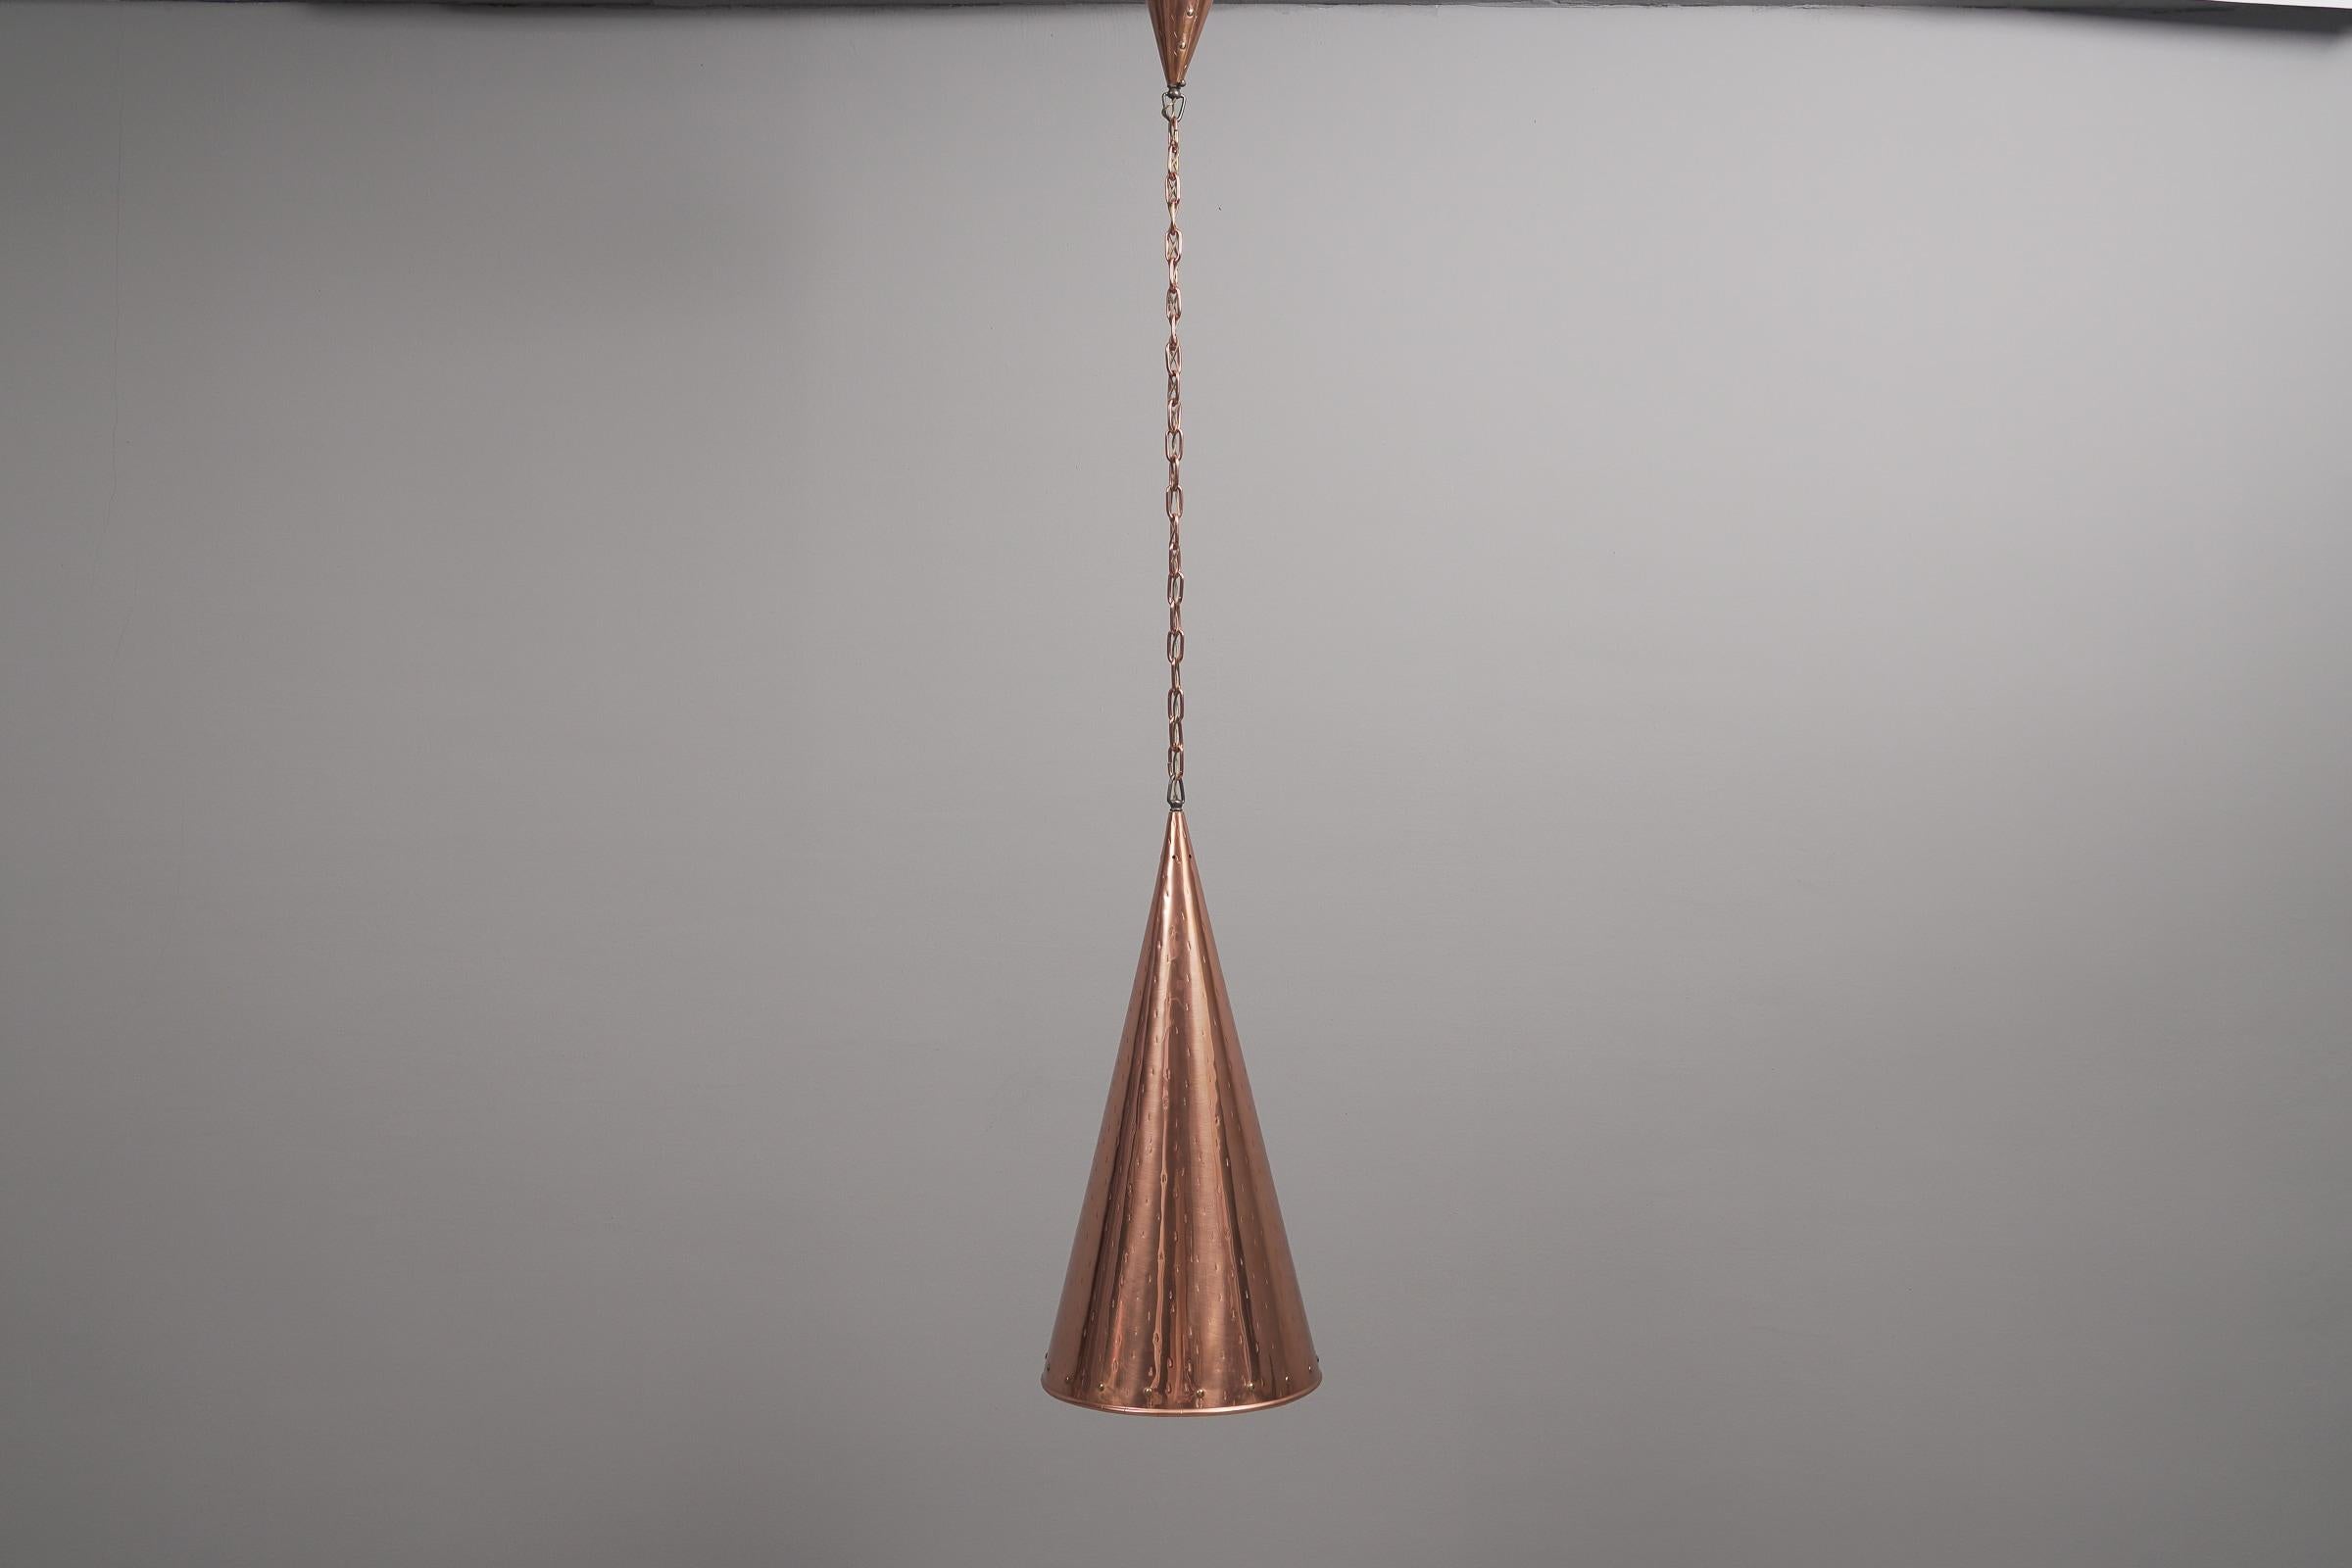 Lovely and highly decorative Mid-Century Modern cone pendant lamp or hanging light. Designed and manufactured by E.S. Horn Aalestrup, Denmark, 1950s.

The cone itself is about 61cm high.

Executed in hammered copper, the pendant lamp comes with 1 x